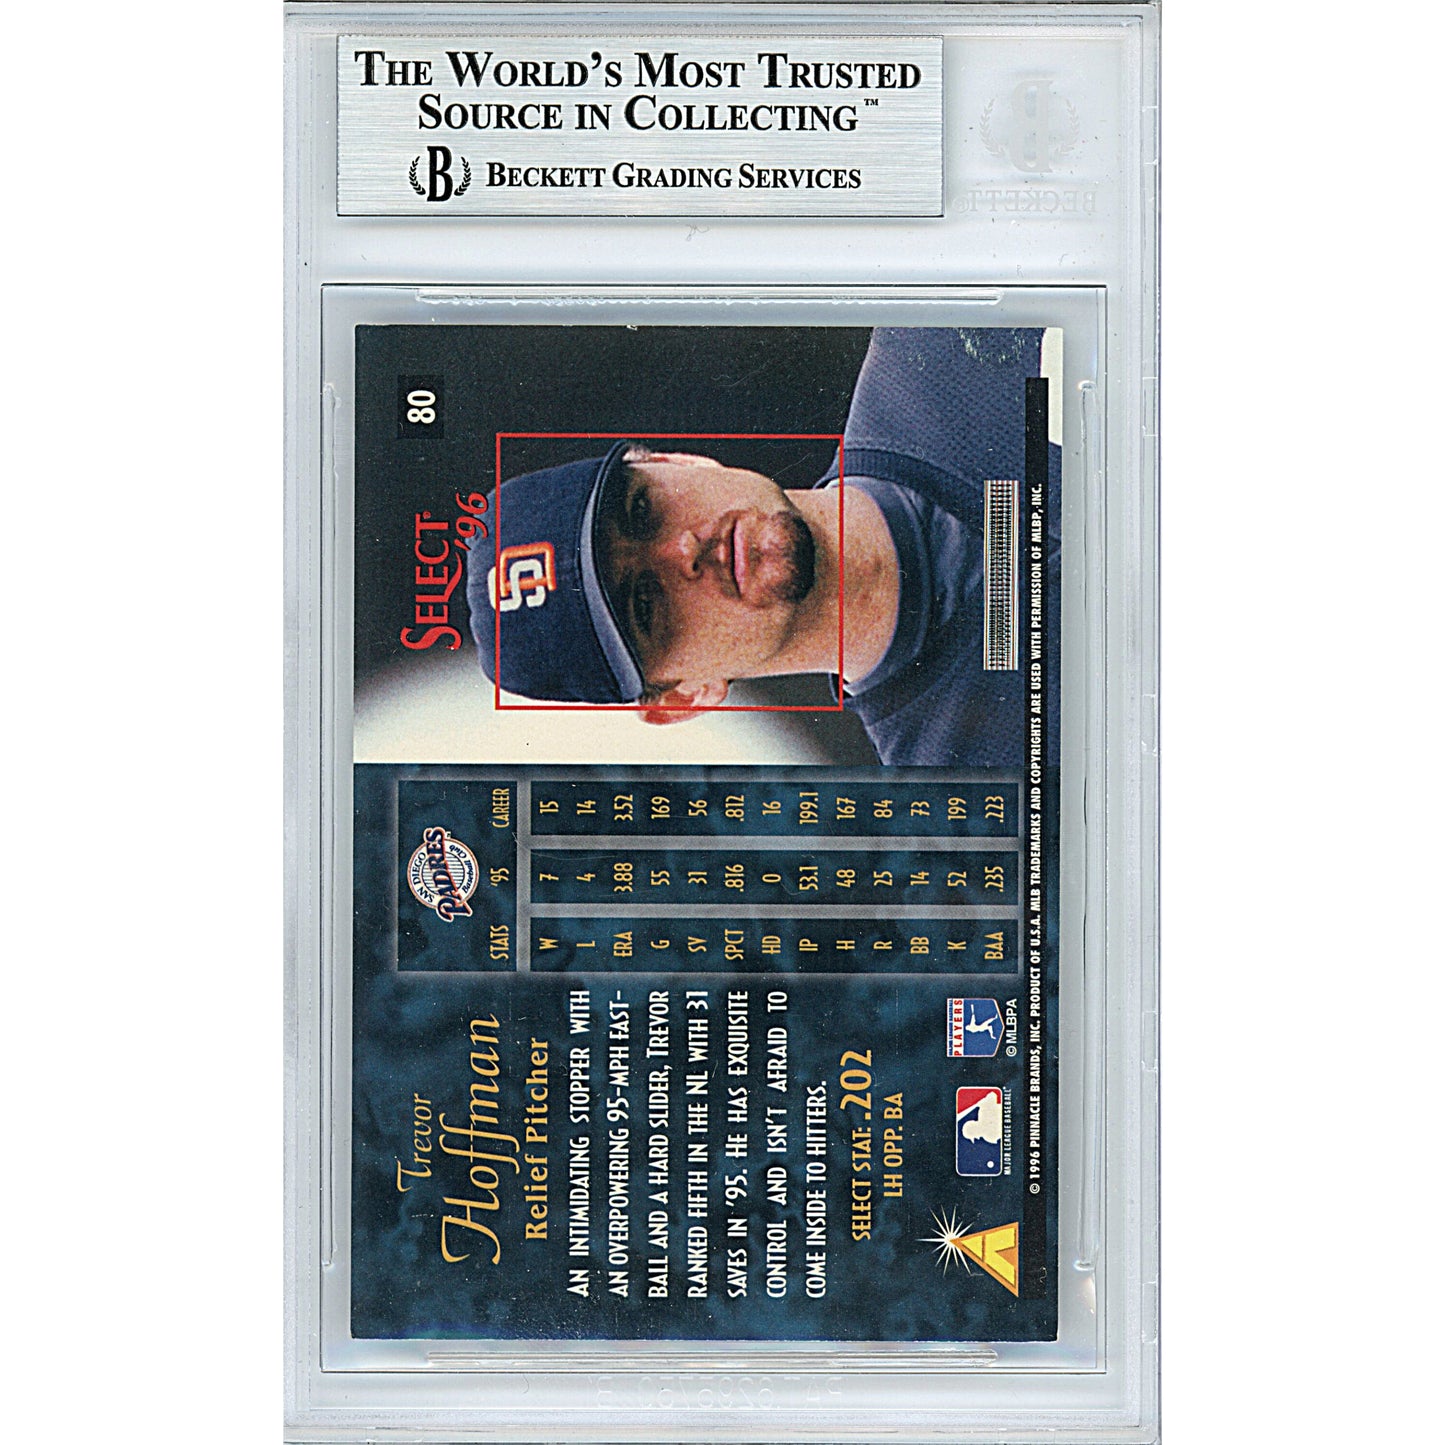 Baseballs- Autographed- Trevor Hoffman Signed San Diego Padres 1996 Pinnacle Select Baseball Trading Card- Beckett BAS BGS Authenticated - Slabbed- 00011847524 - 104